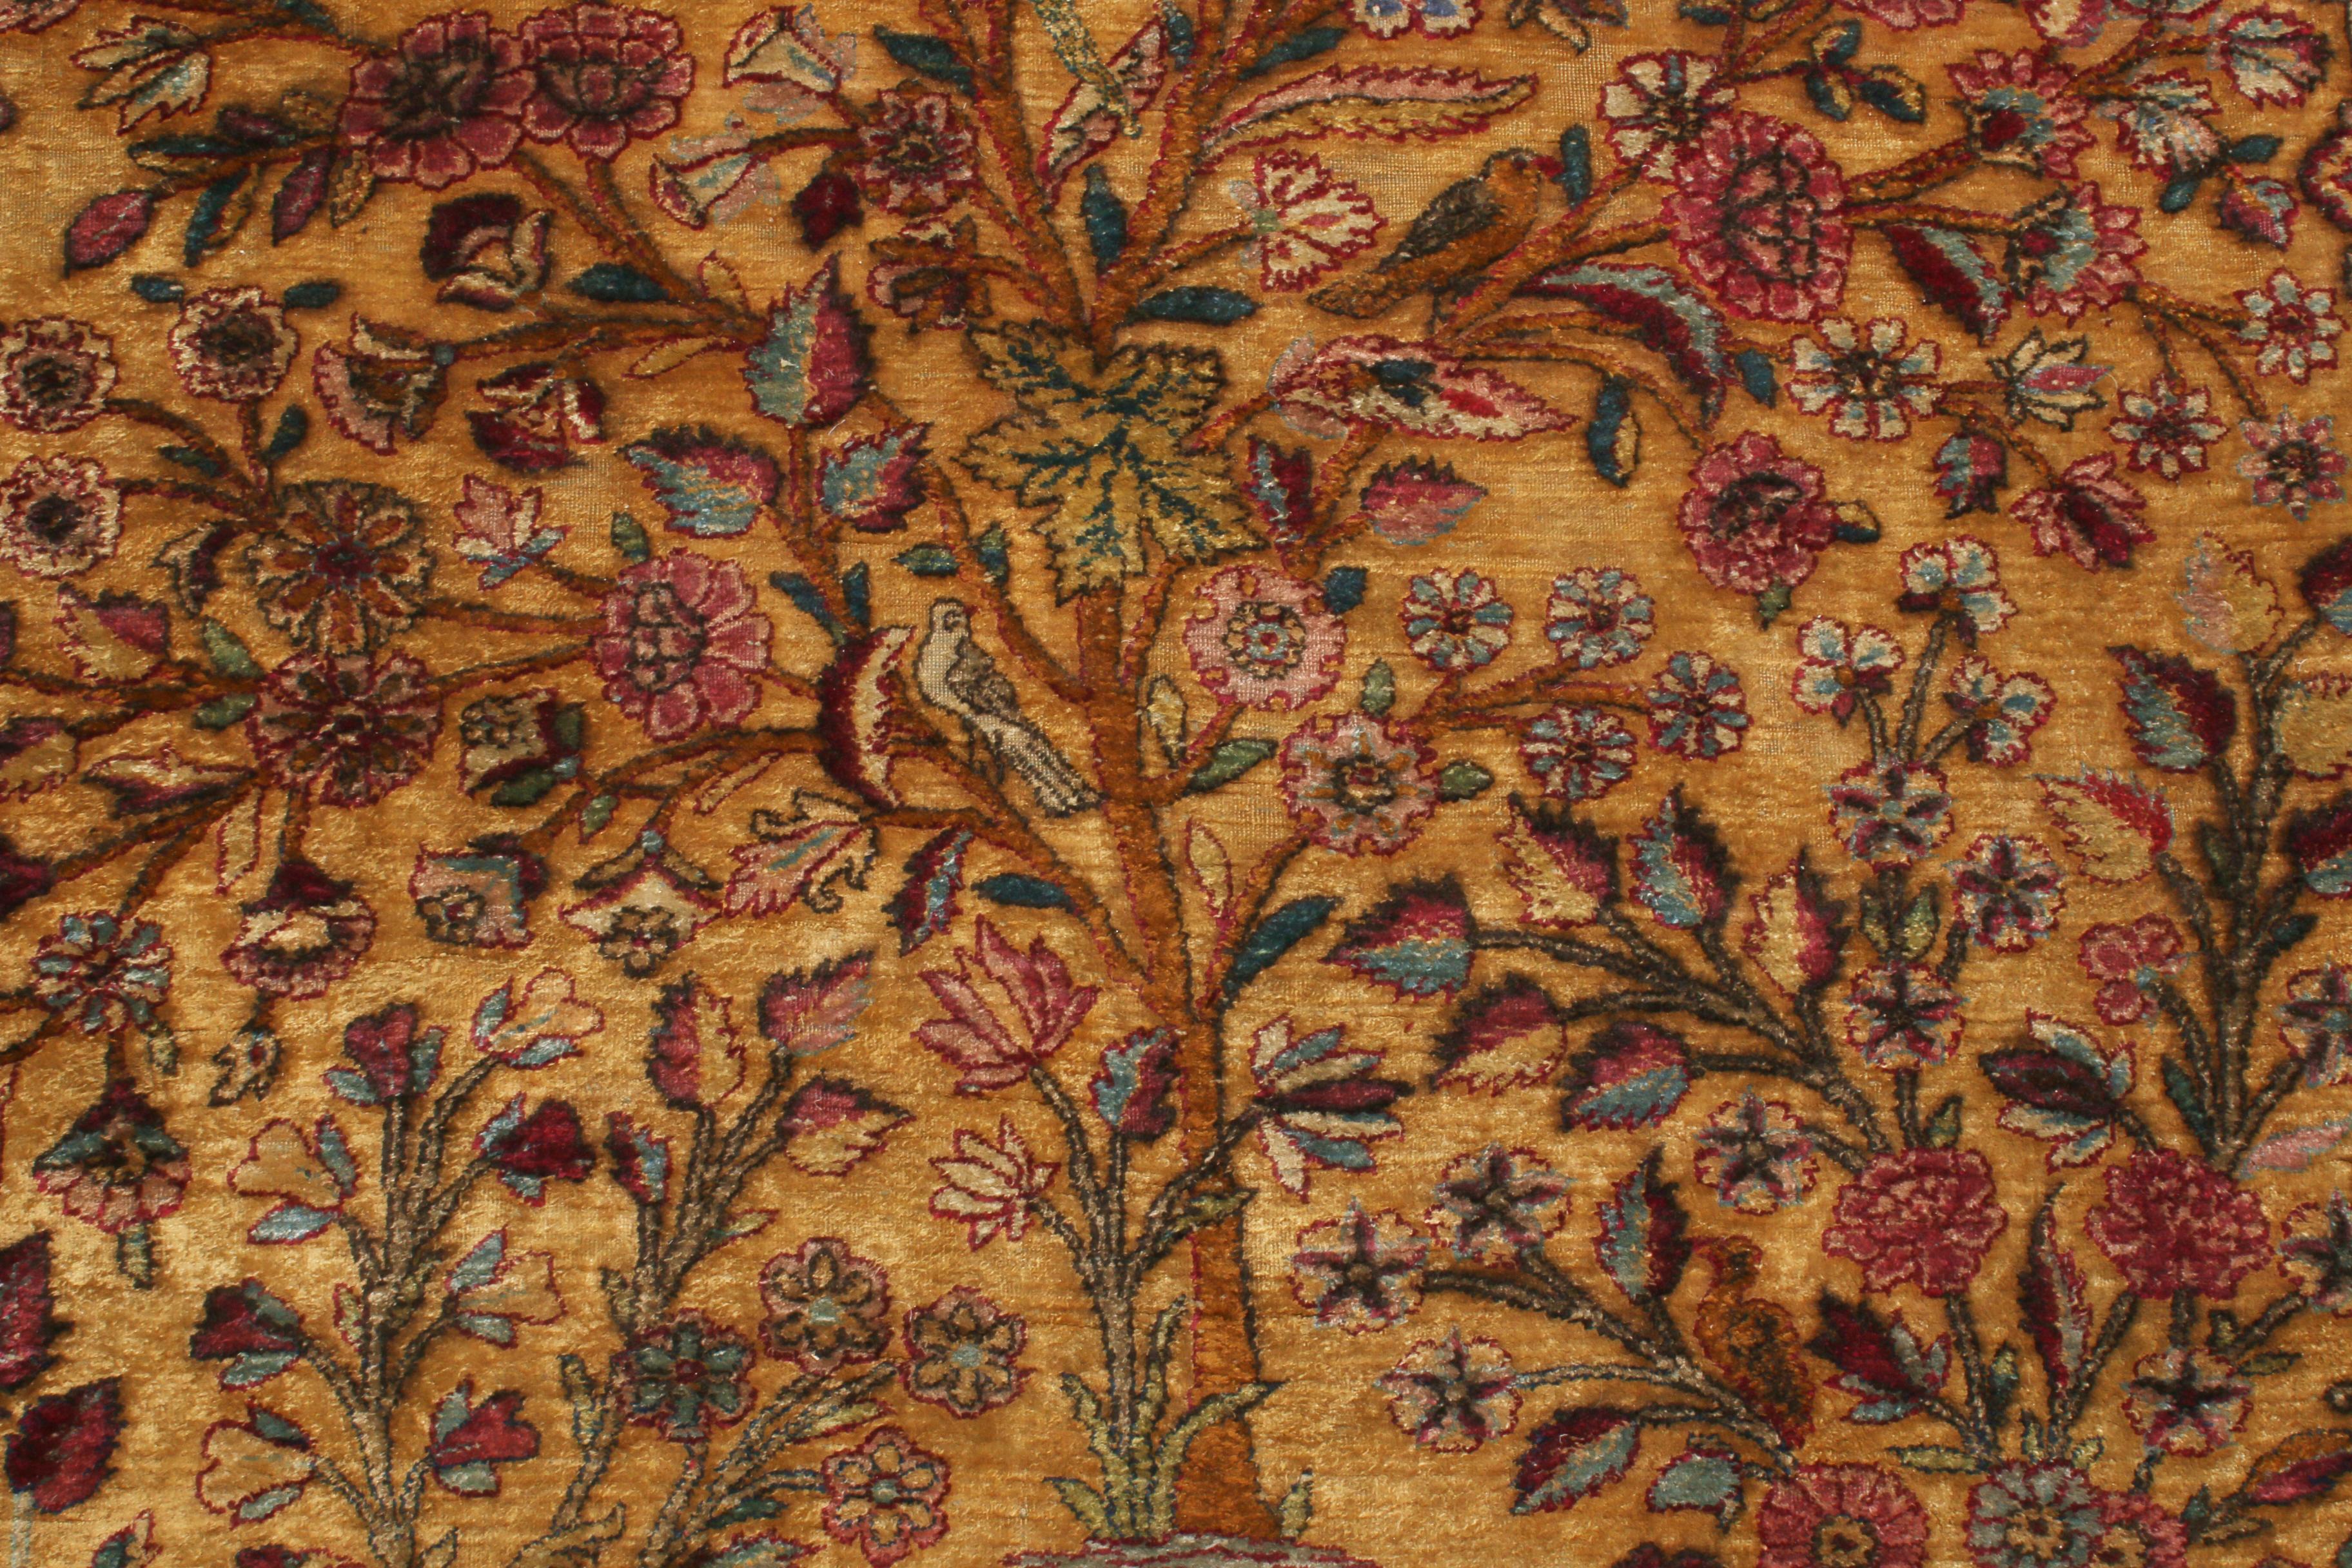 Late 19th Century Kashan Golden-Brown and Blue Silk Persian Rug with Unique Floral Medallion